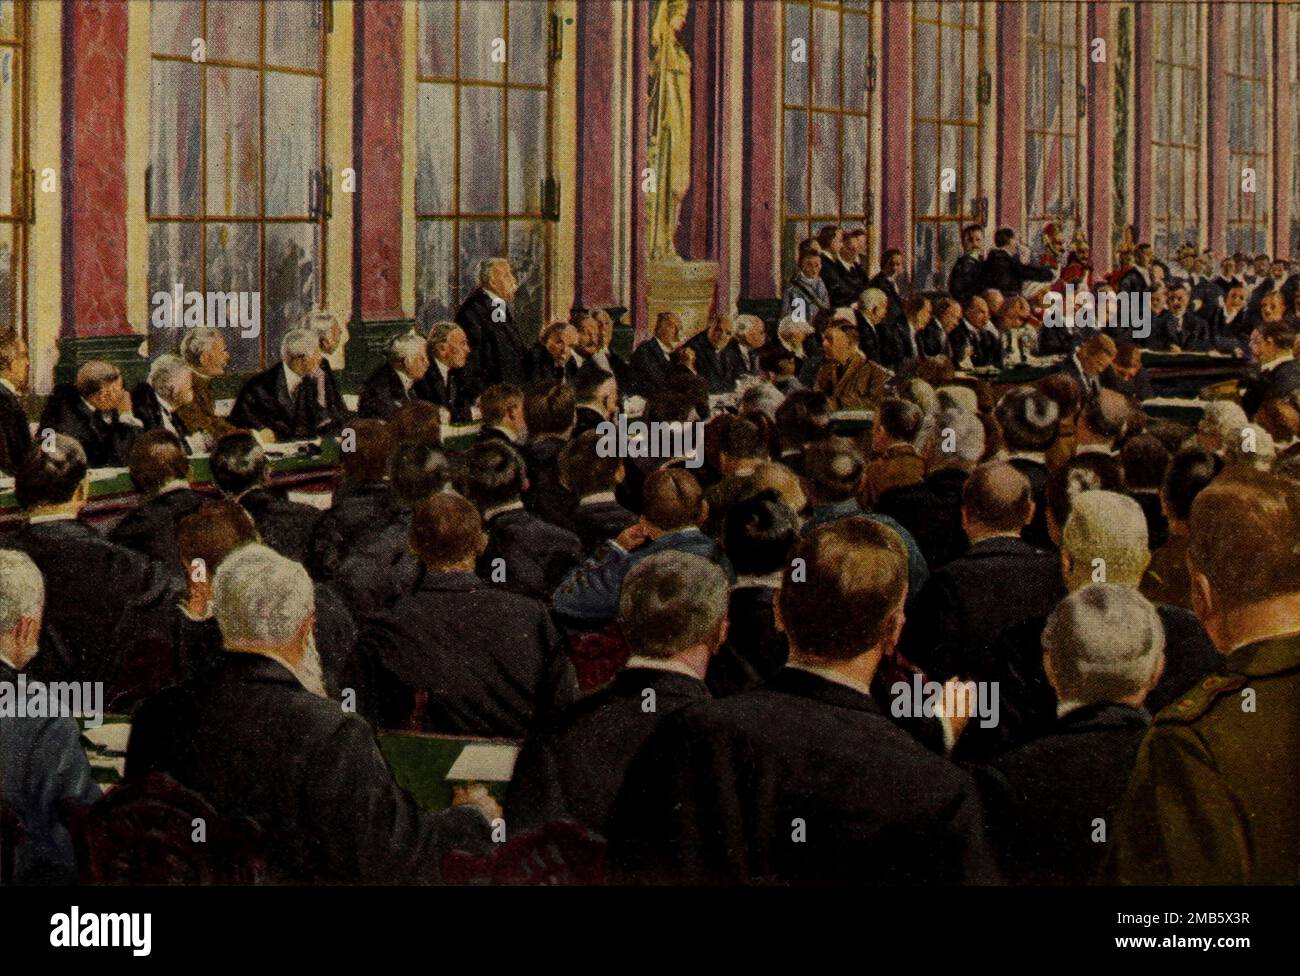 Signing the Peace Treaty in the Hall of Mirrors June 28, 1919 from the book The story of the great war; the complete historical records of events to date DIPLOMATIC AND STATE PAPERS by Reynolds, Francis Joseph, 1867-1937; Churchill, Allen Leon; Miller, Francis Trevelyan, 1877-1959; Wood, Leonard, 1860-1927; Knight, Austin Melvin, 1854-1927; Palmer, Frederick, 1873-1958; Simonds, Frank Herbert, 1878-; Ruhl, Arthur Brown, 1876-  Volume VII Published 1920 Stock Photo